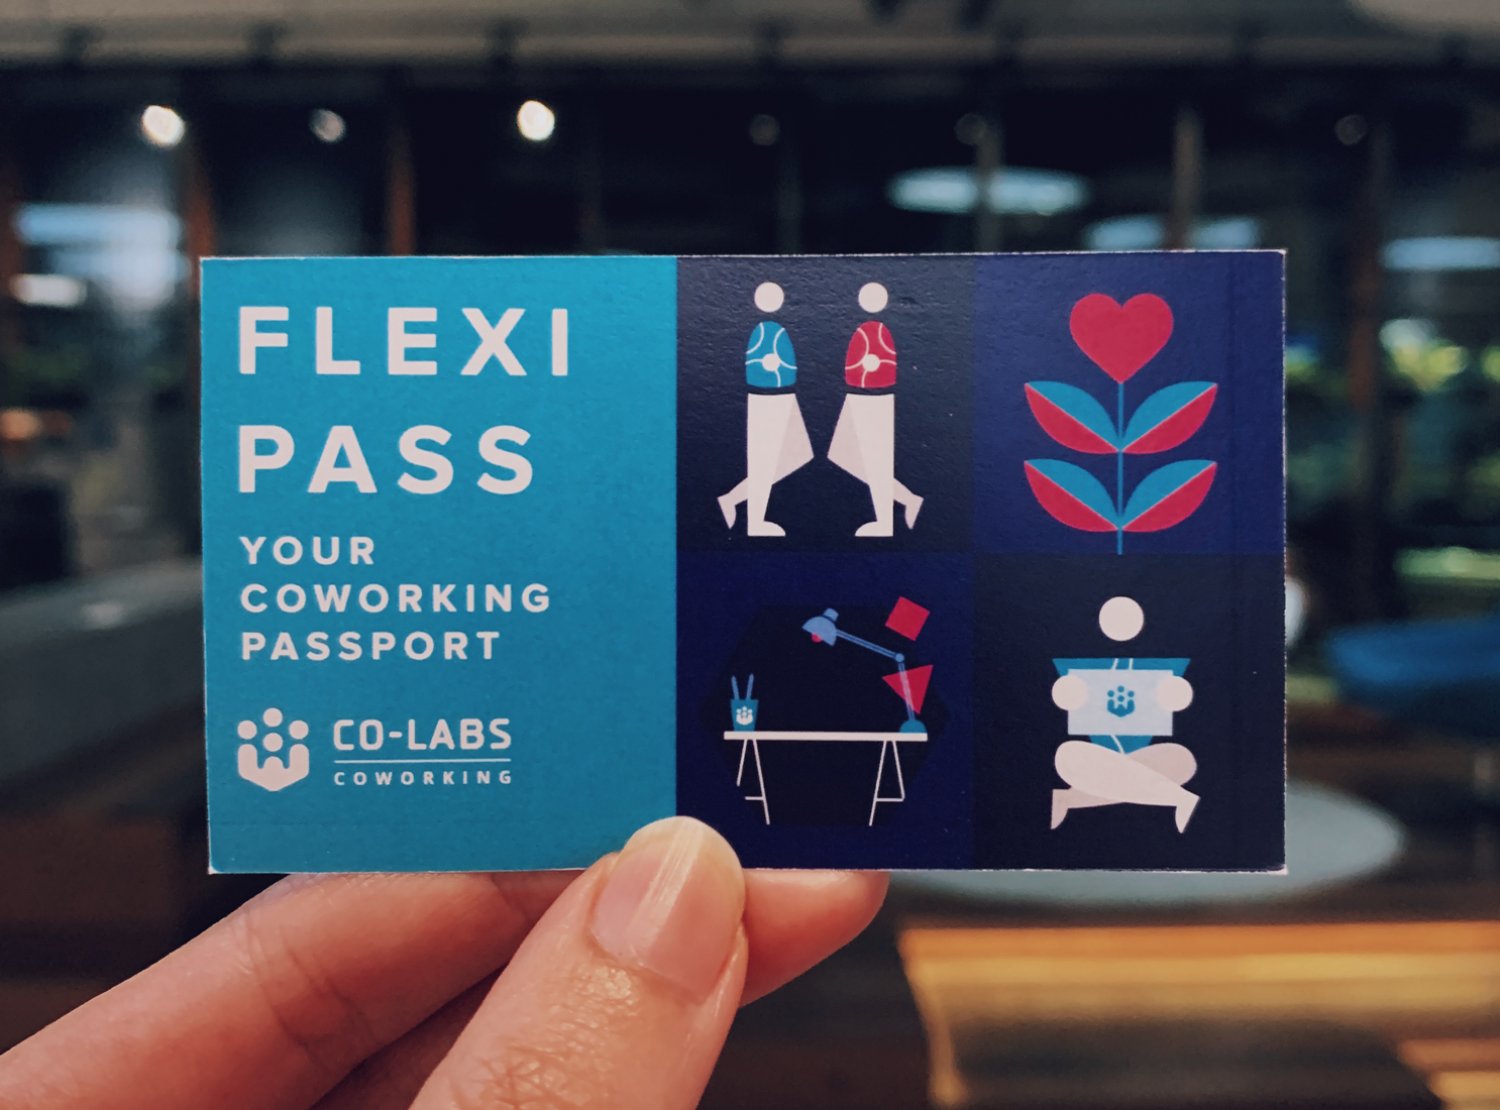 Co-labs Coworking Flexi Pass